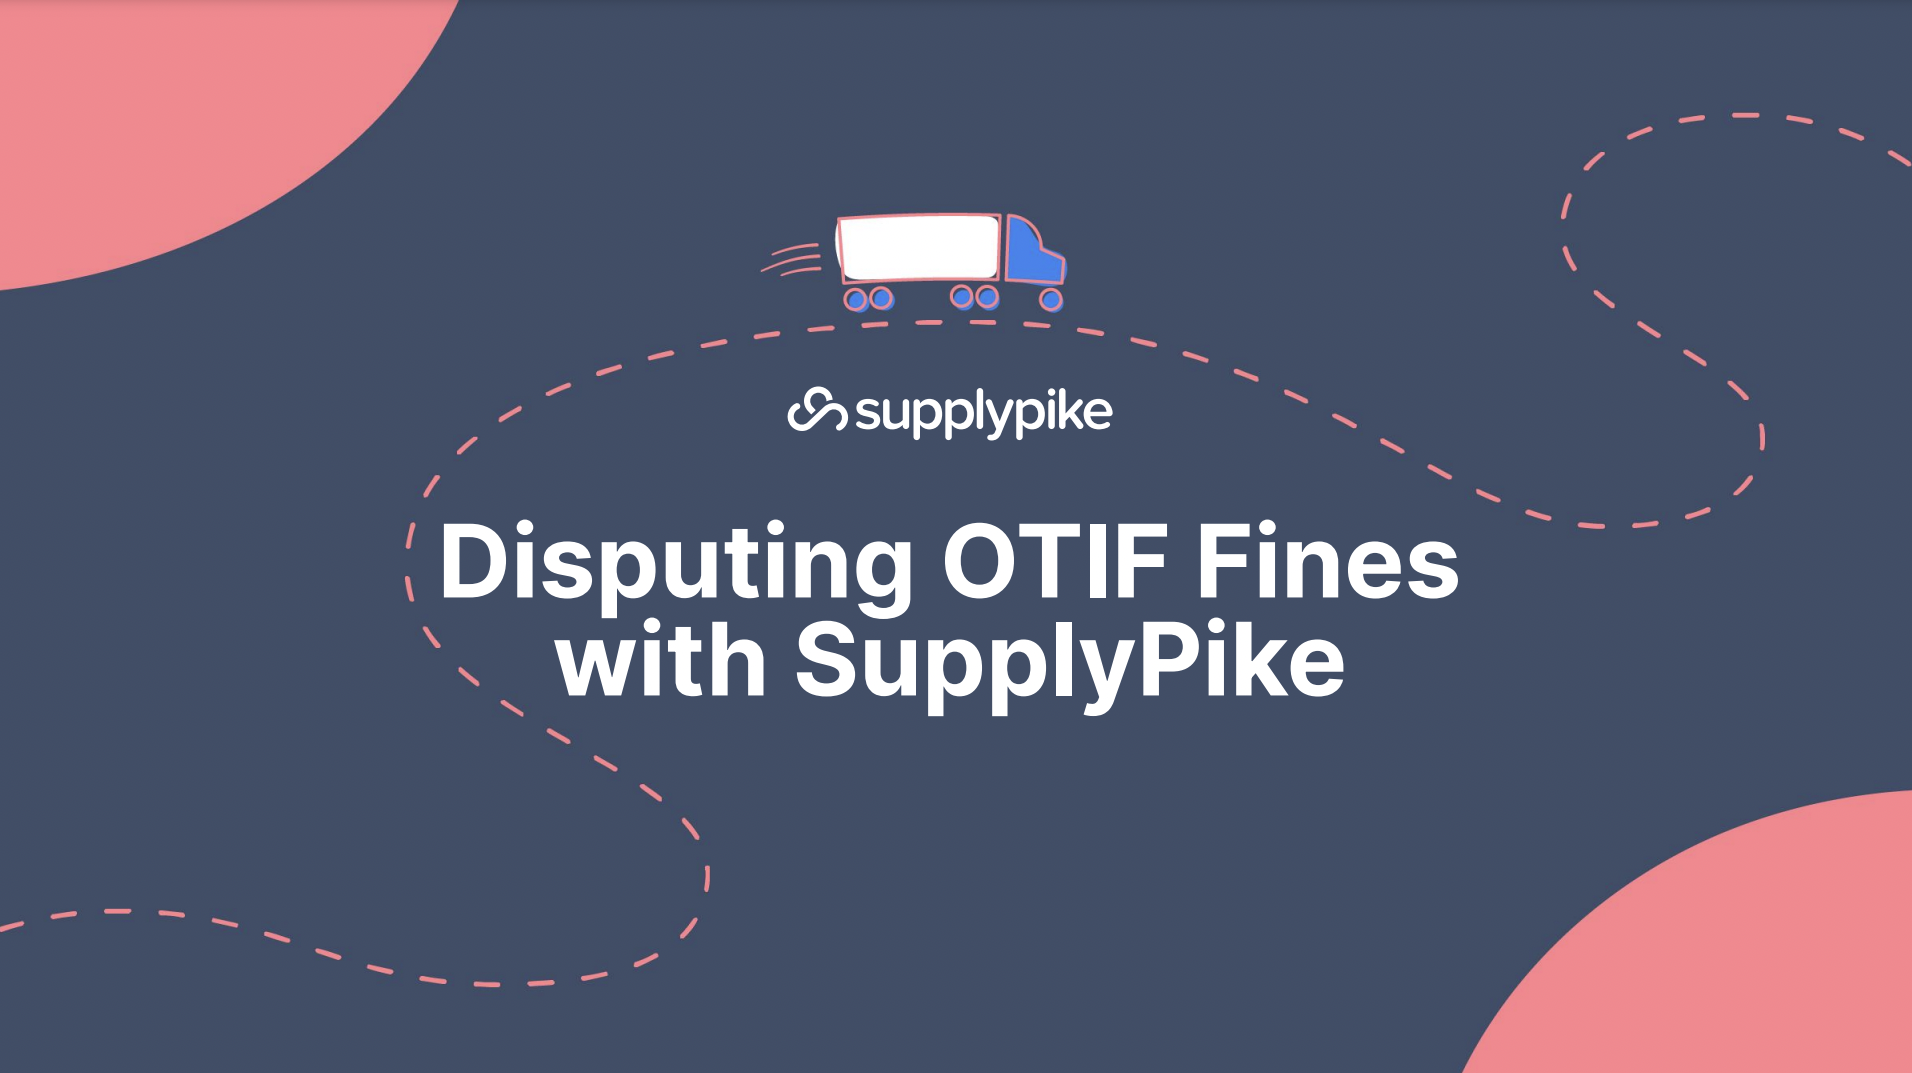 Disputing OTIF Fines with SupplyPike